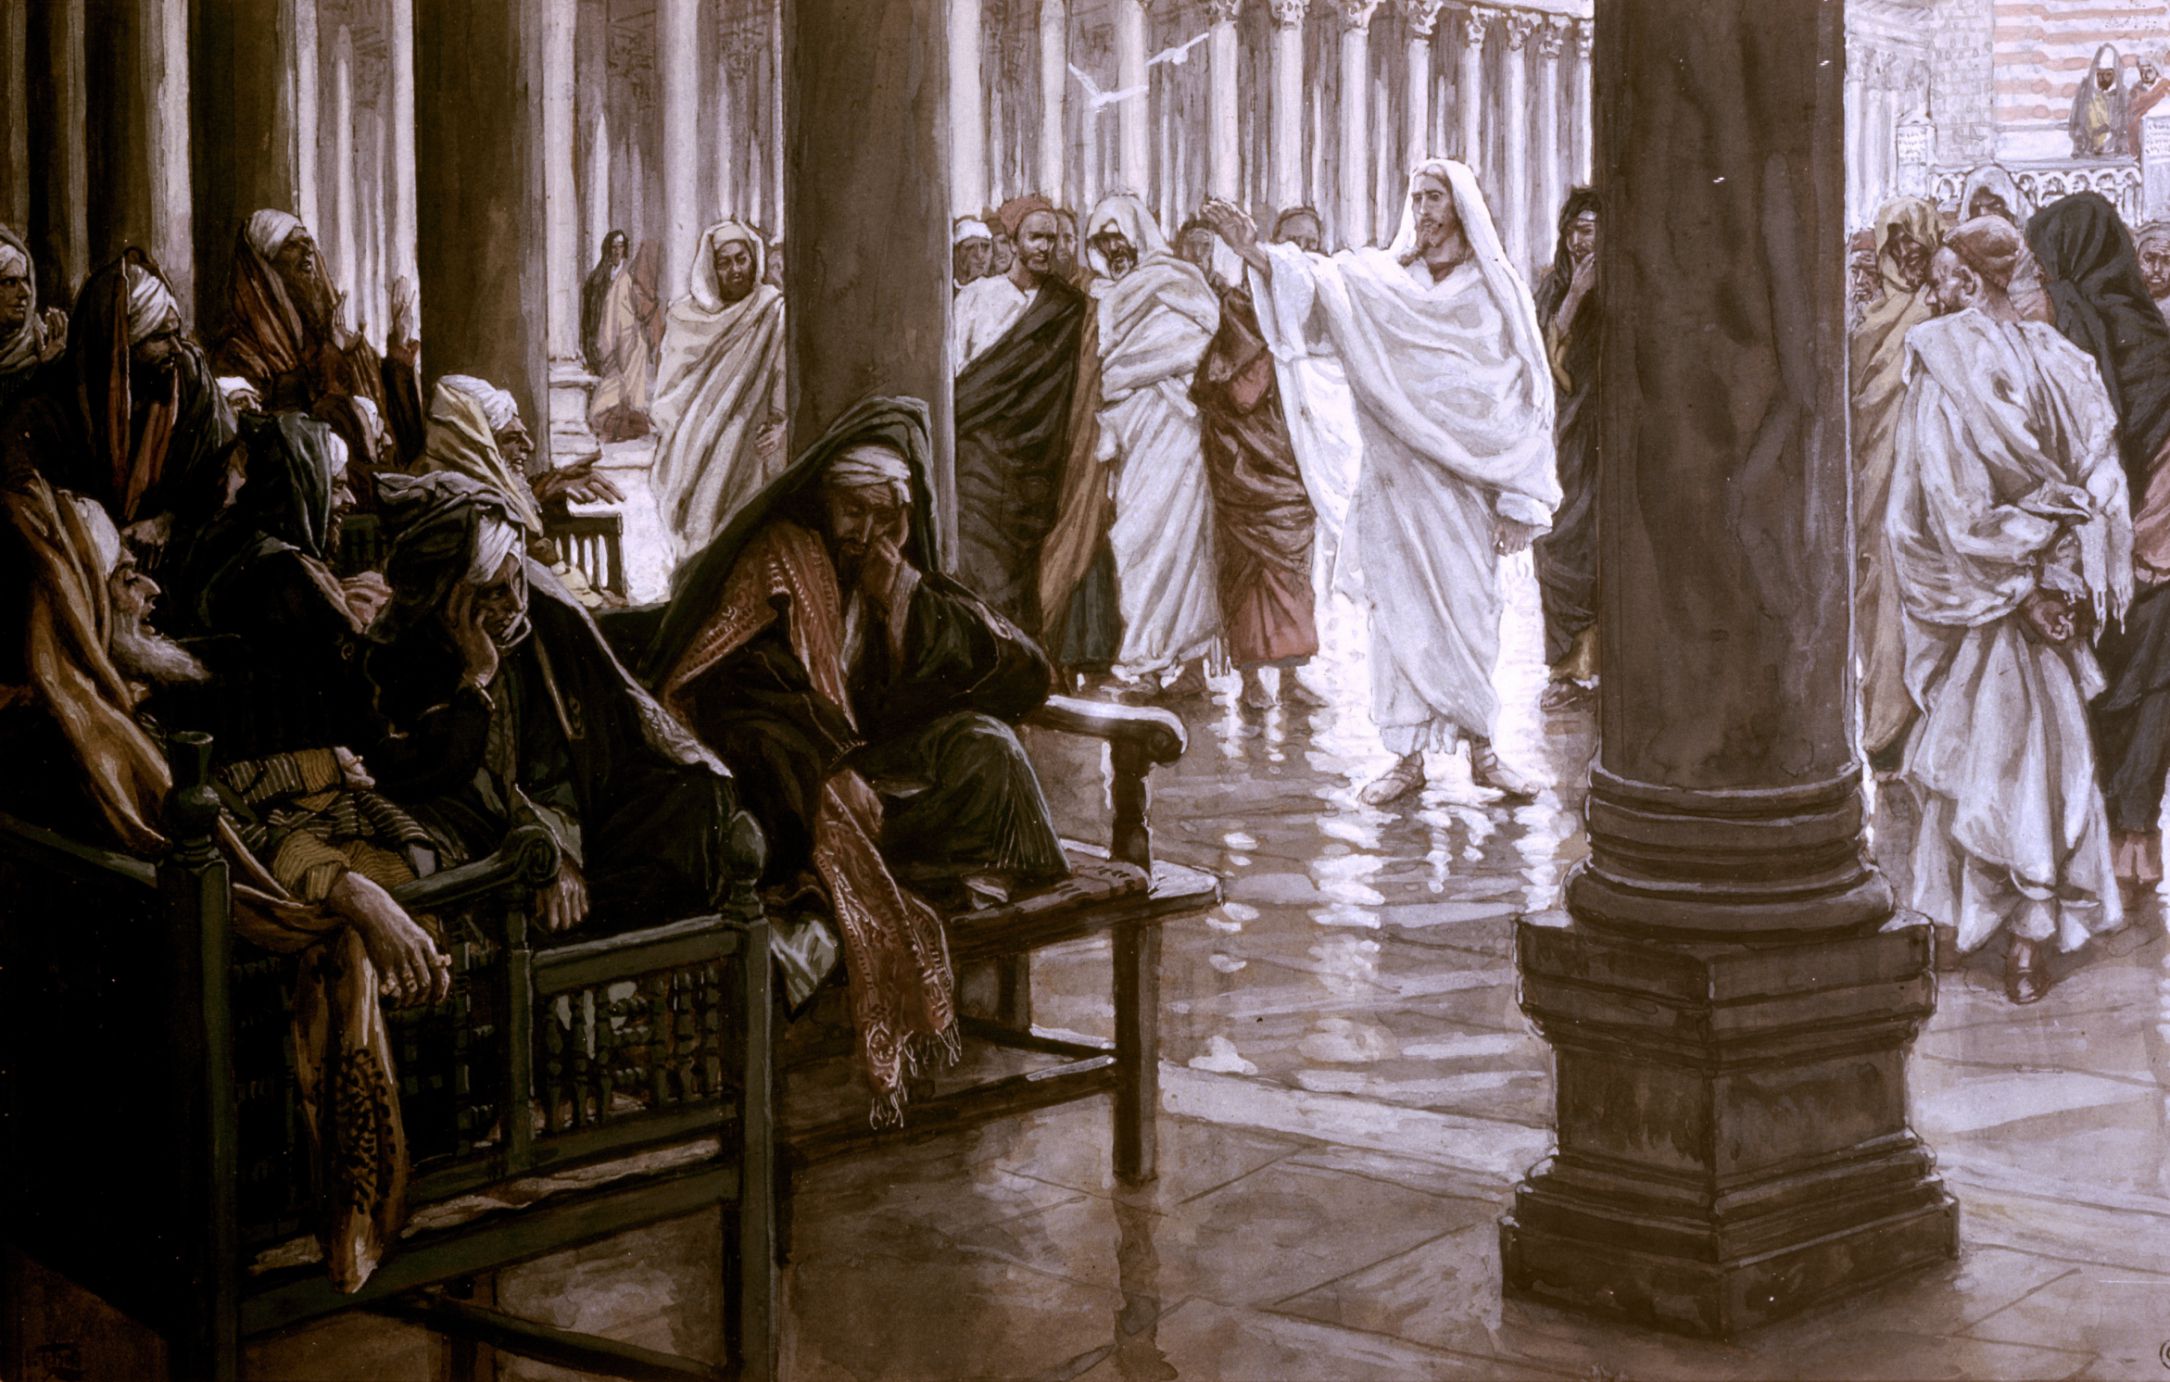 Jesus and the Pharisees